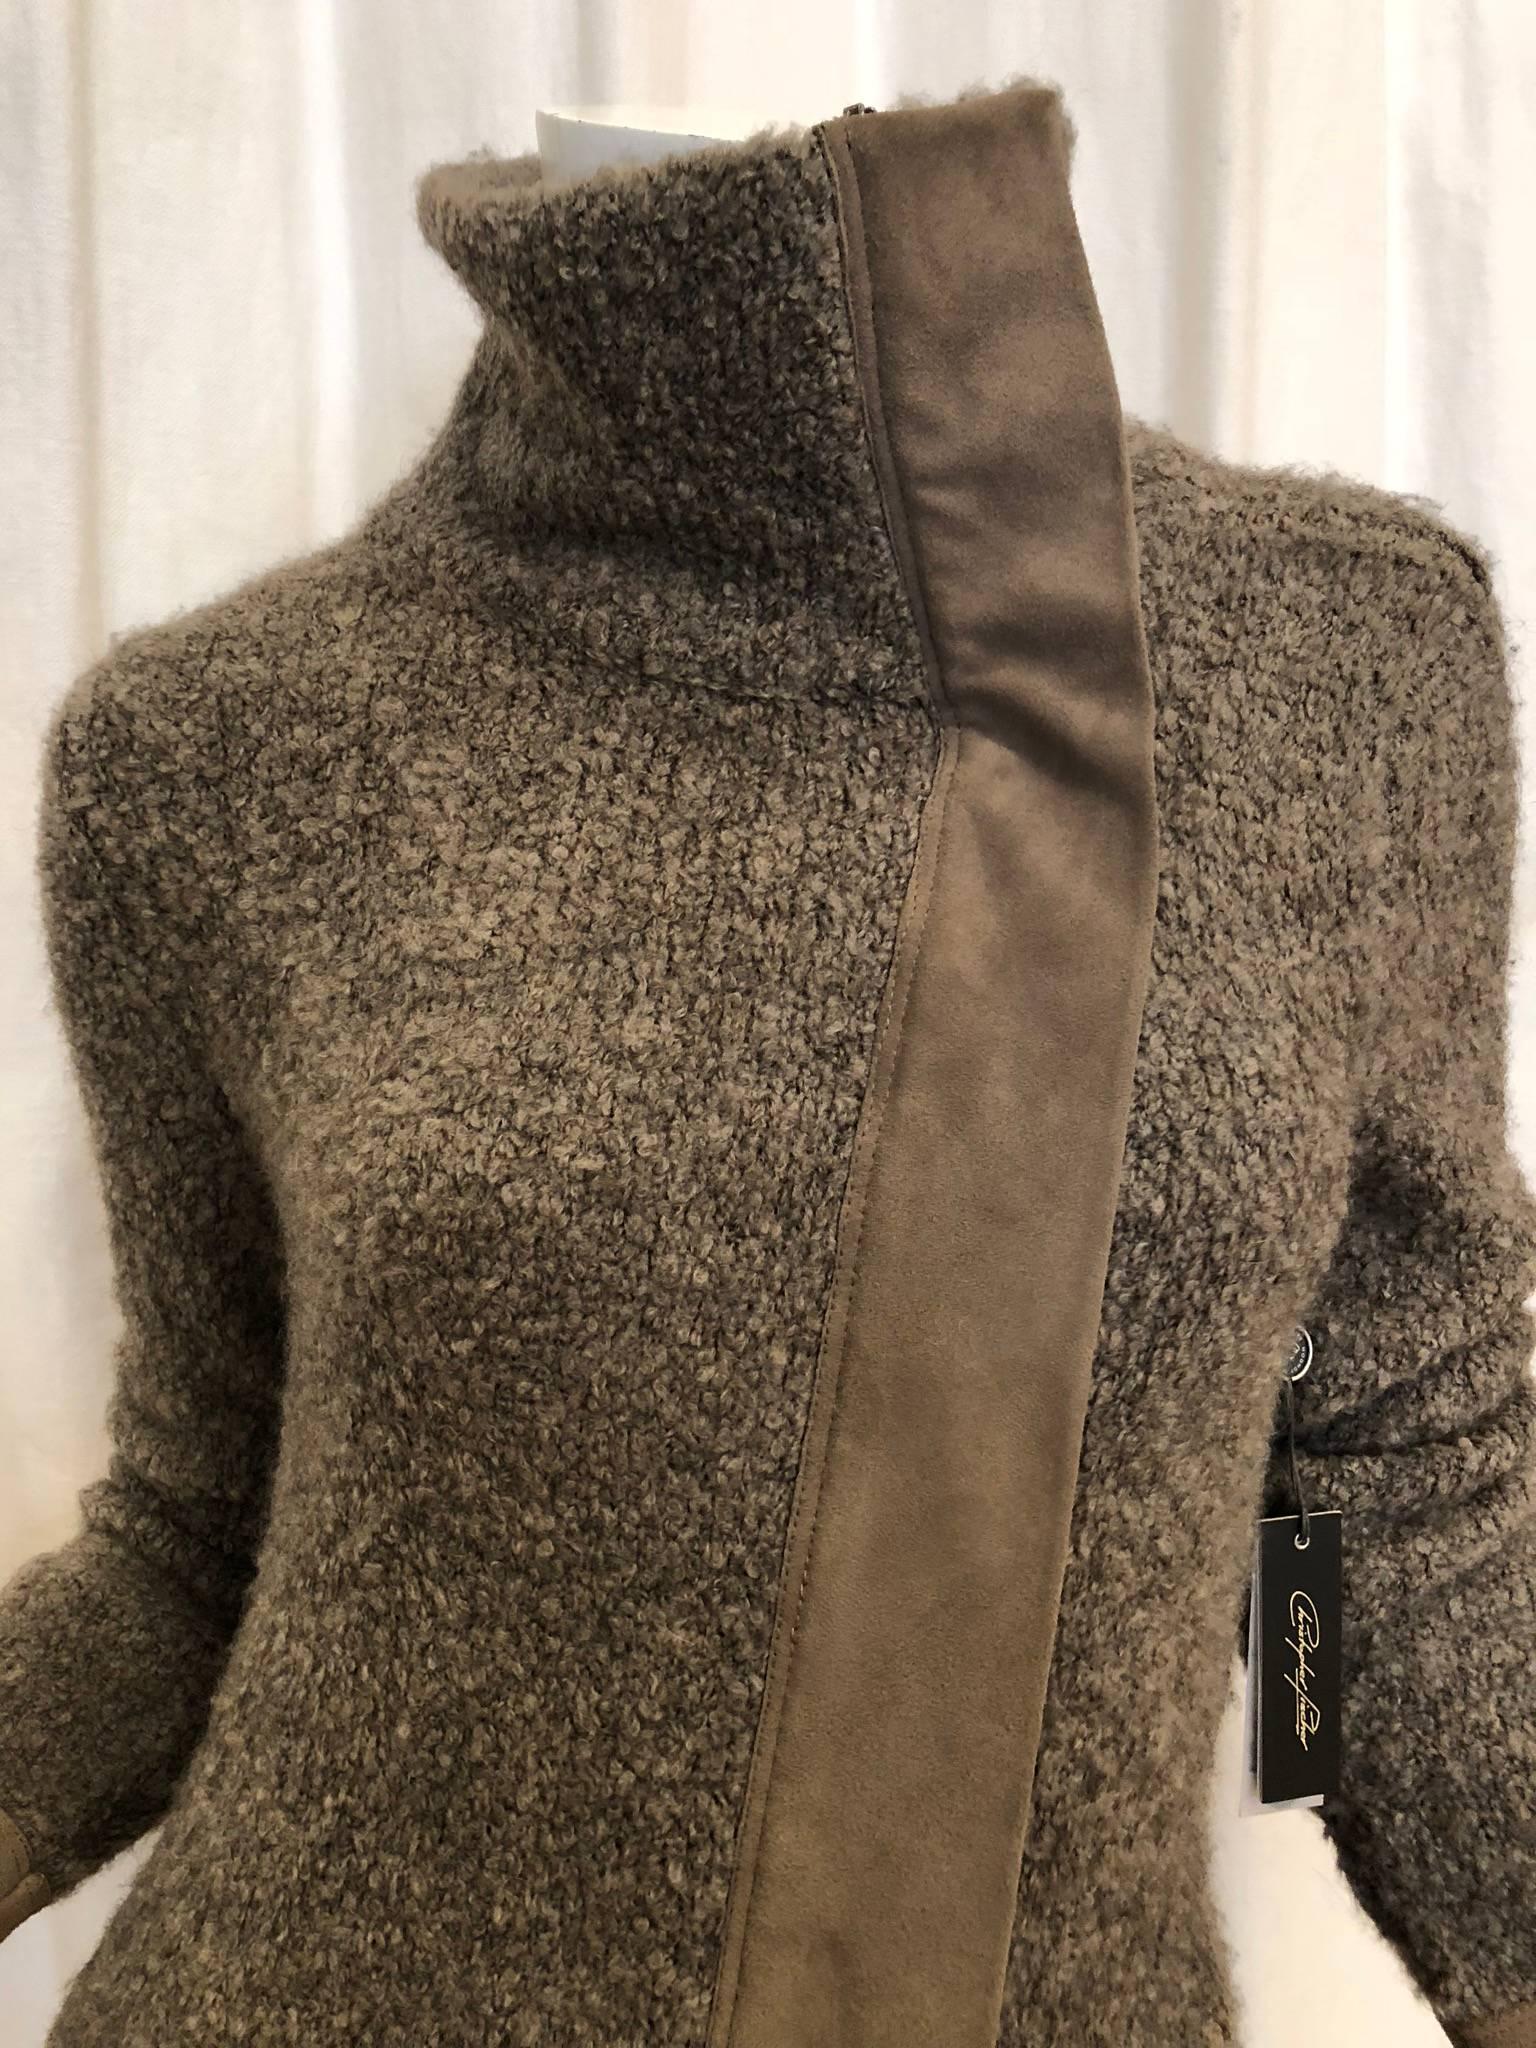 Christopher Fischer Sweater Coat with Suede Detail Zip up and T-Neck.